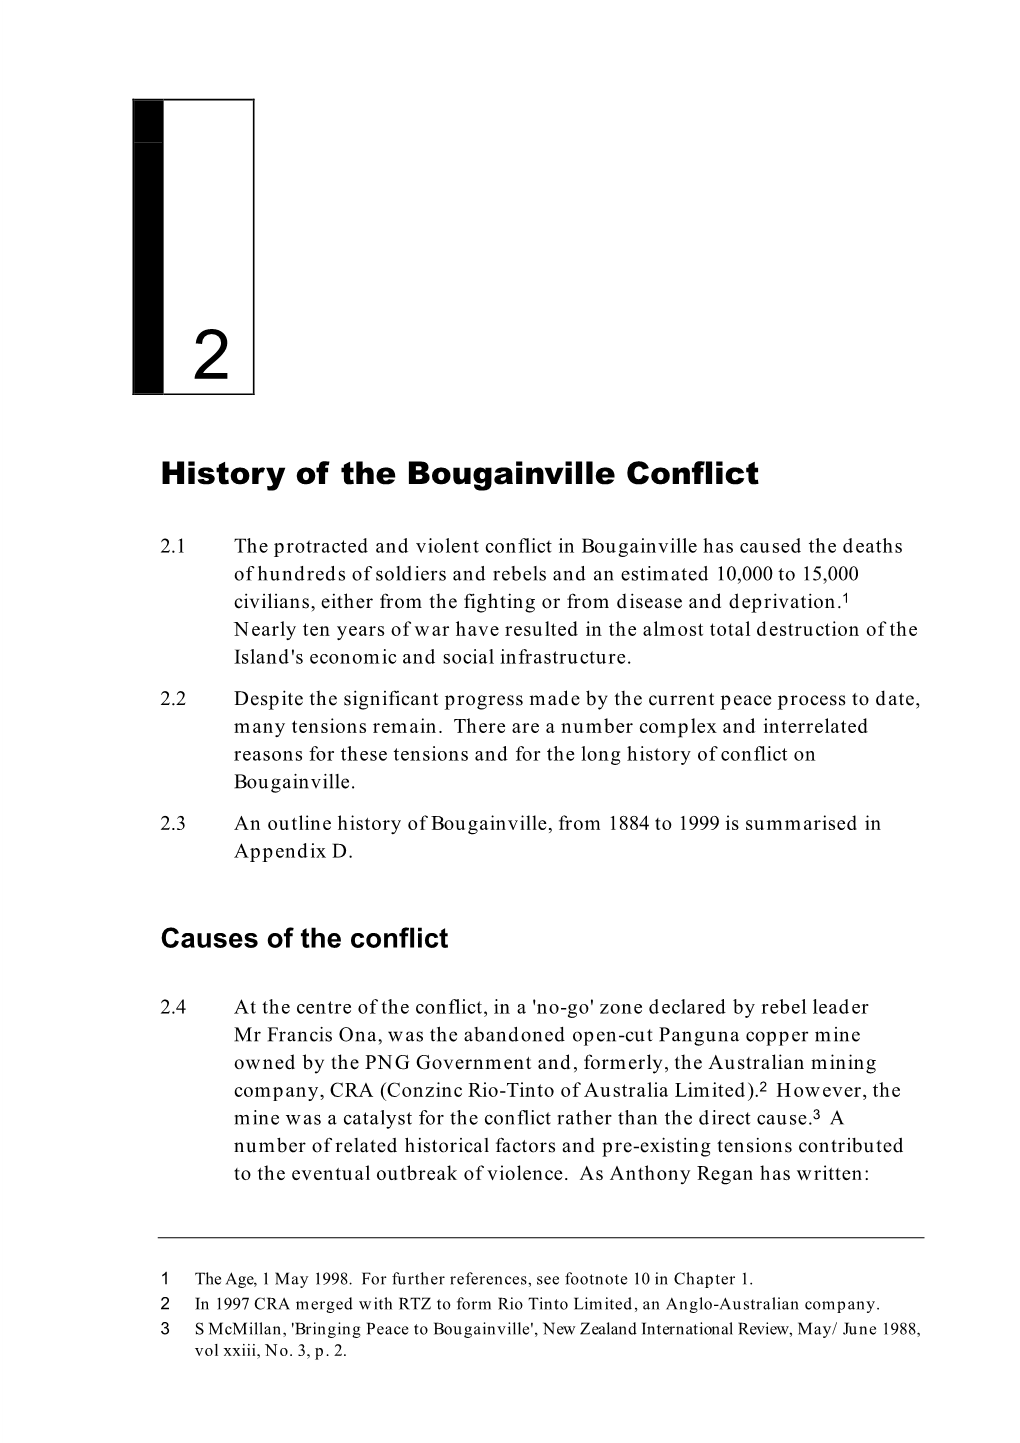 Chapter 2: History of the Bougainville Conflict